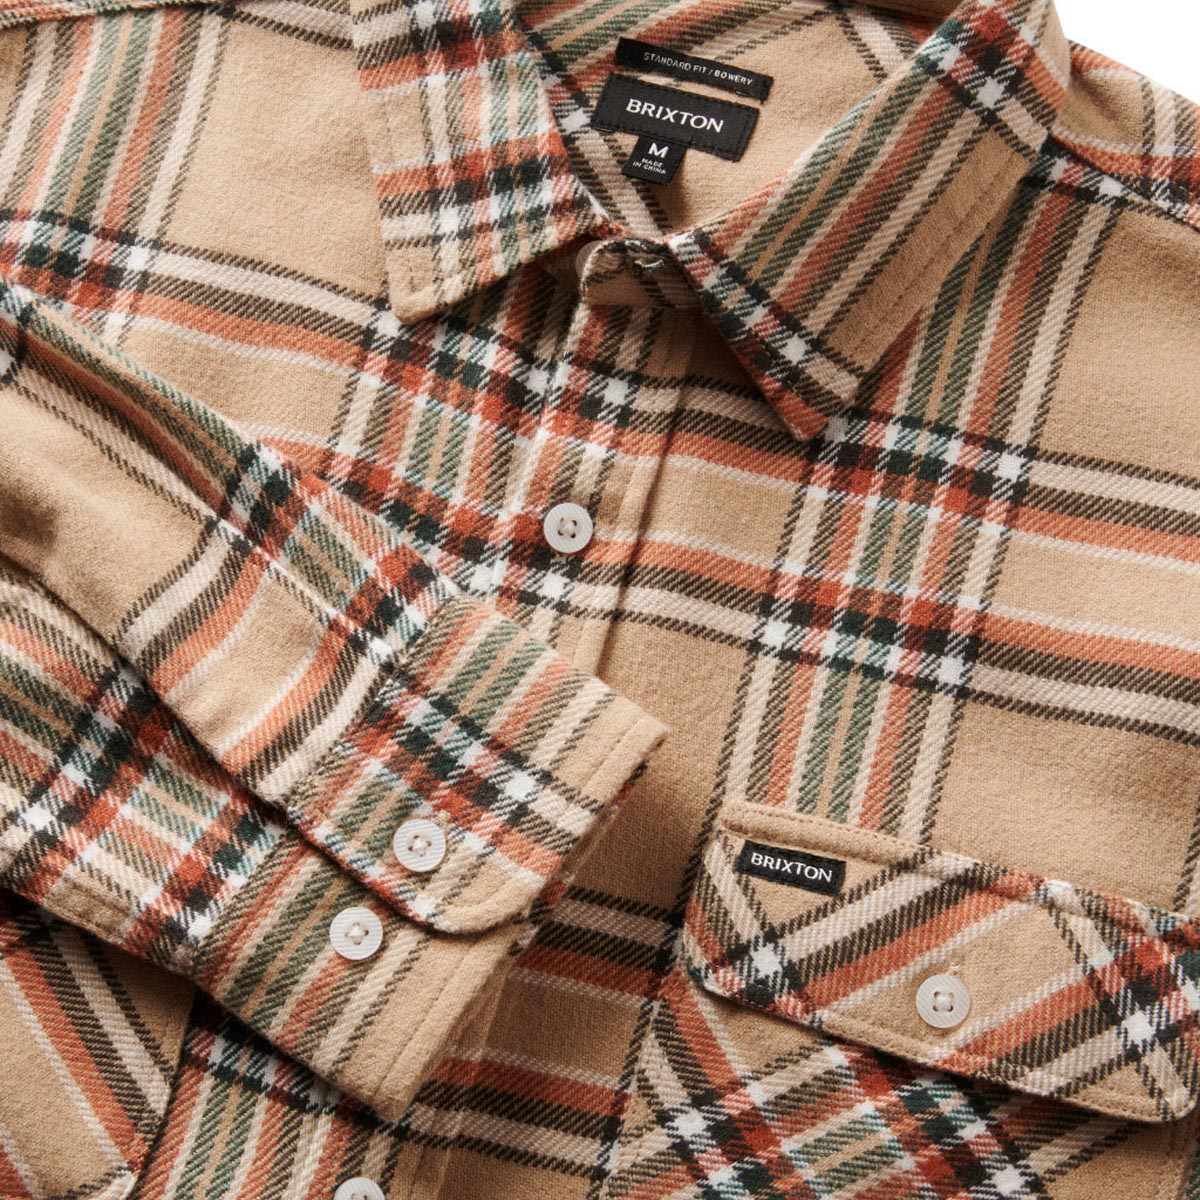 Brixton Bowery Flannel Long Sleeve Shirt - Sand/Off White/Terracotta image 4